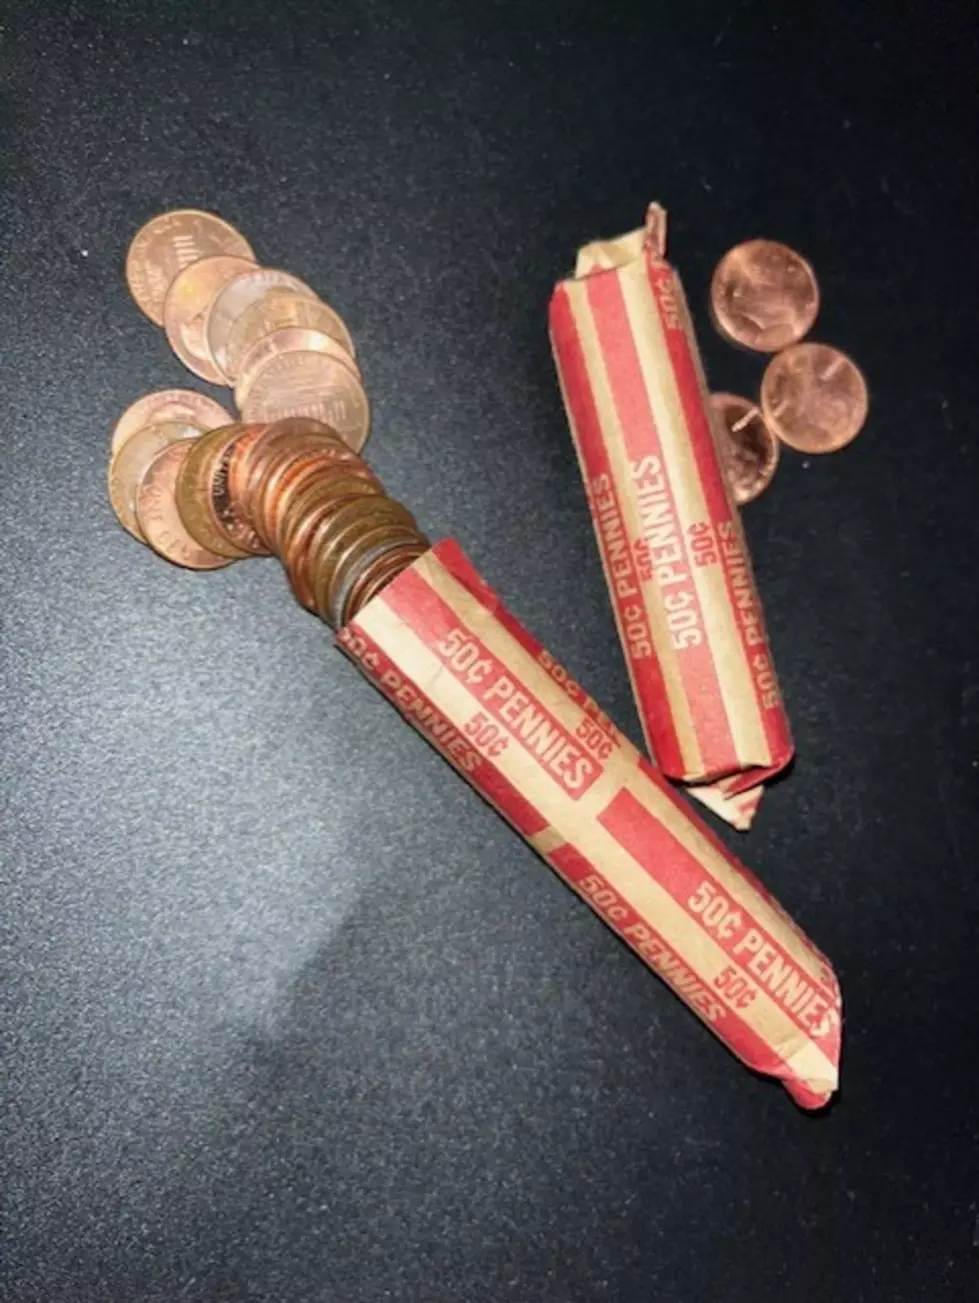 Alabamians Checking Their Pennies After Shocking Discovery